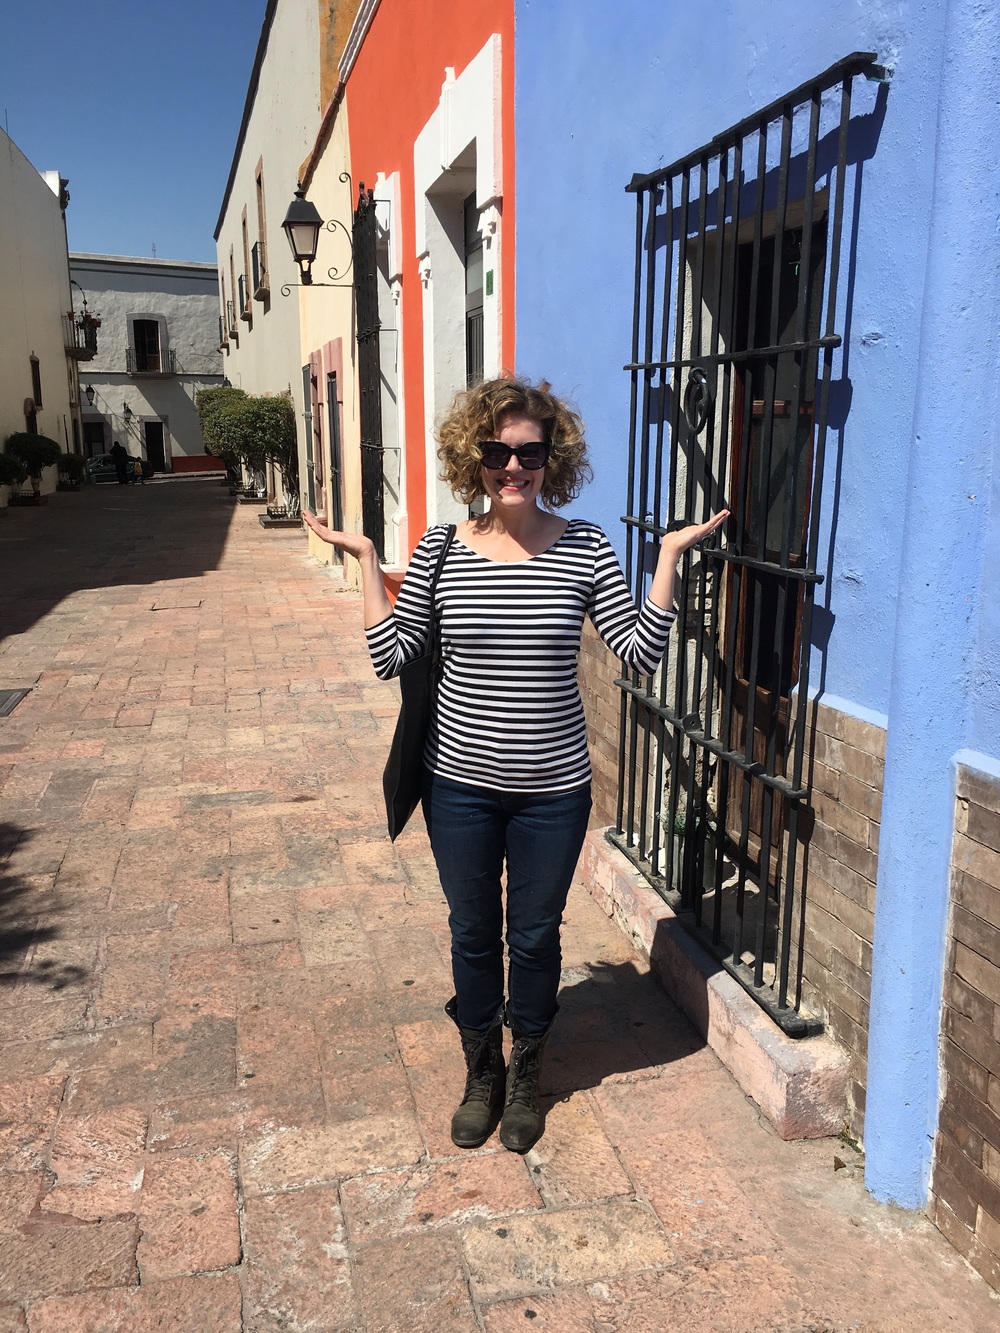 Outside Cafe Breton in Queretaro - showered! 